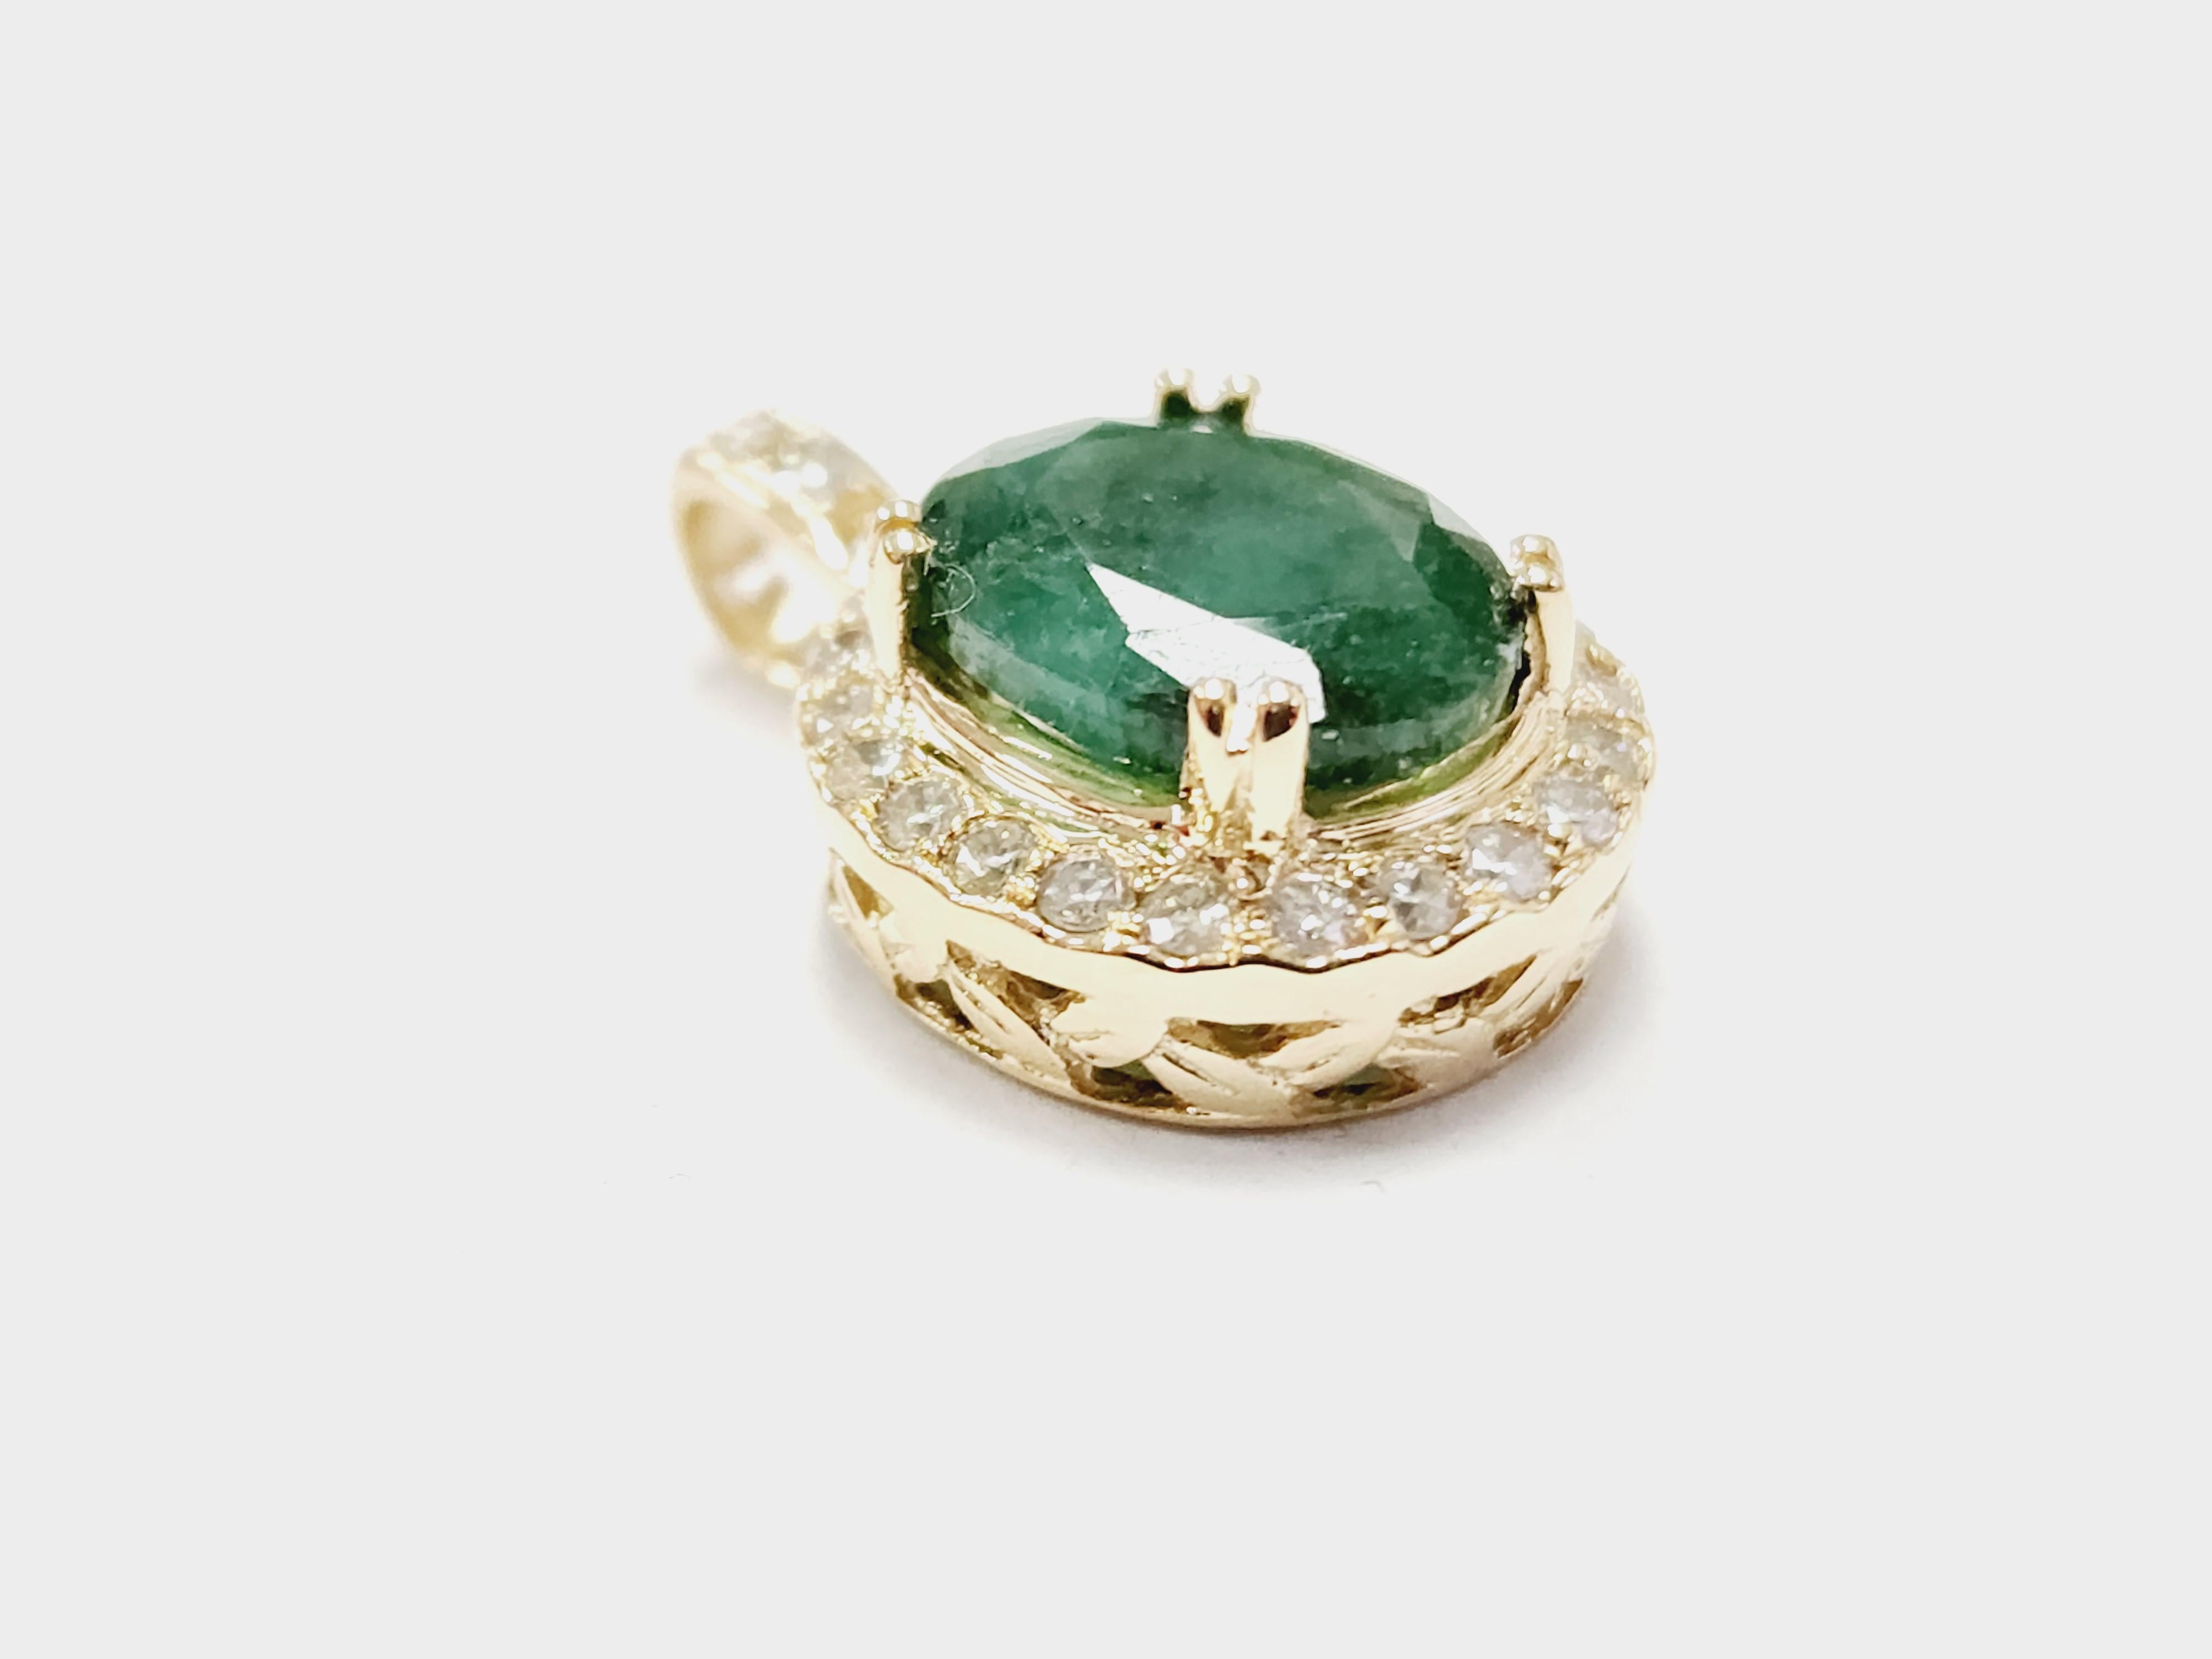 3.55 Carats Natural Emerald Diamond Pendant Yellow Gold 14 Karat In New Condition For Sale In Great Neck, NY